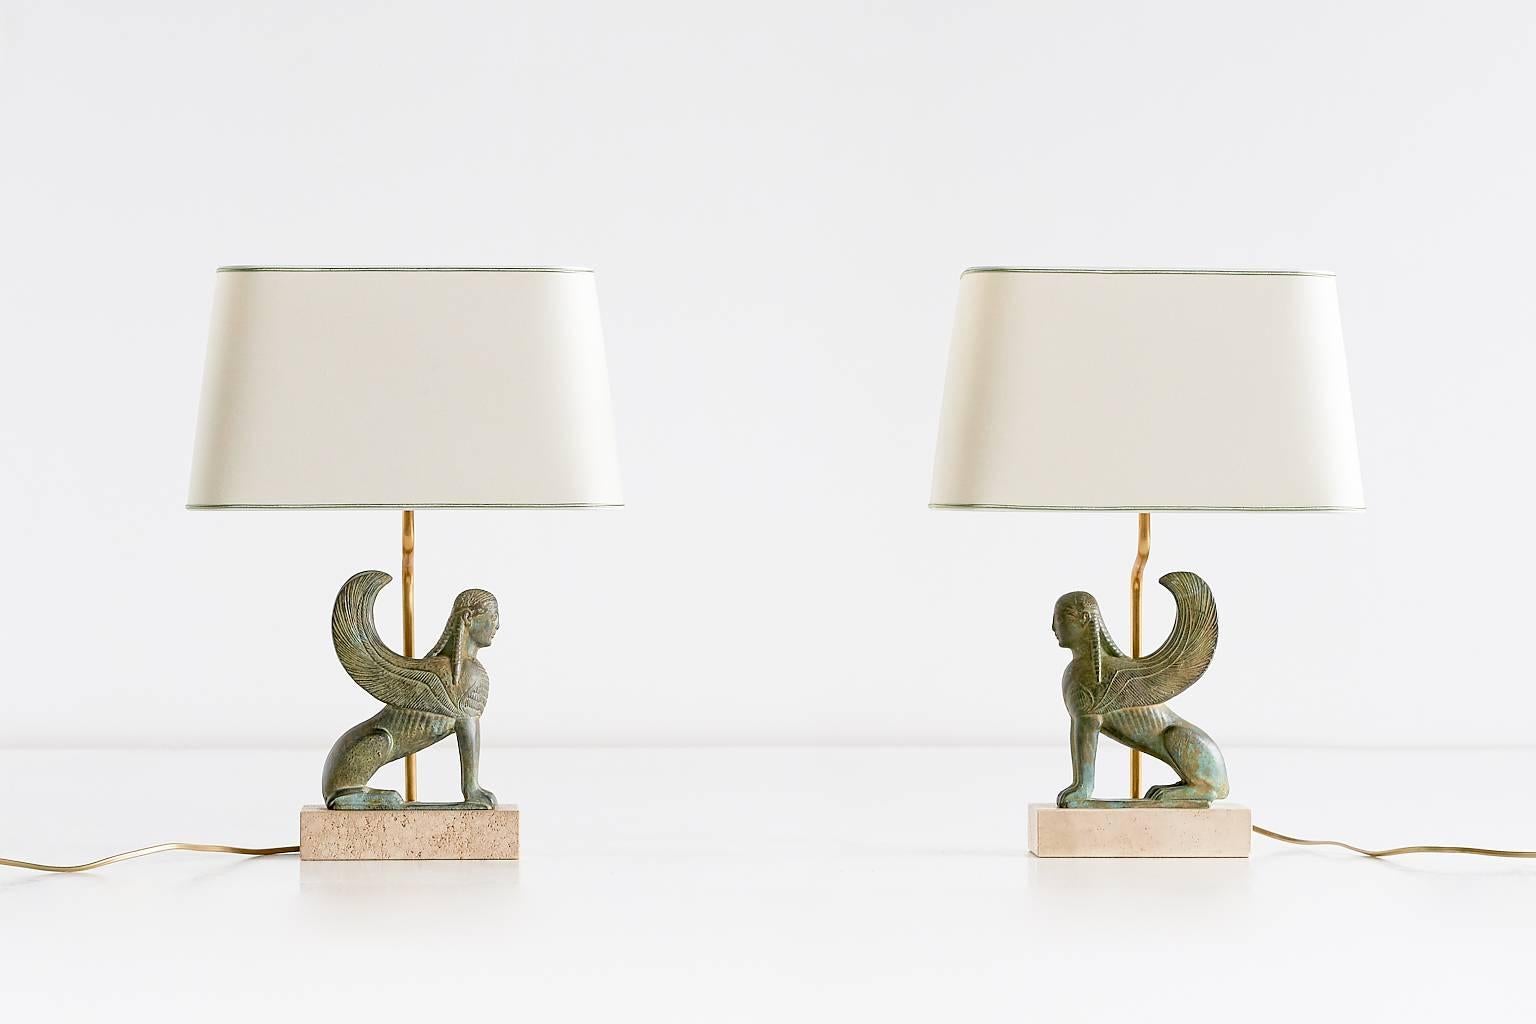 This striking pair of table lamps was designed and produced by Maison Le Dauphin in the 1970s. The intricately decorated golden green ceramic sphinx figures stand on a travertine base. The new ivory shades with a subtly contrasting green trim detail